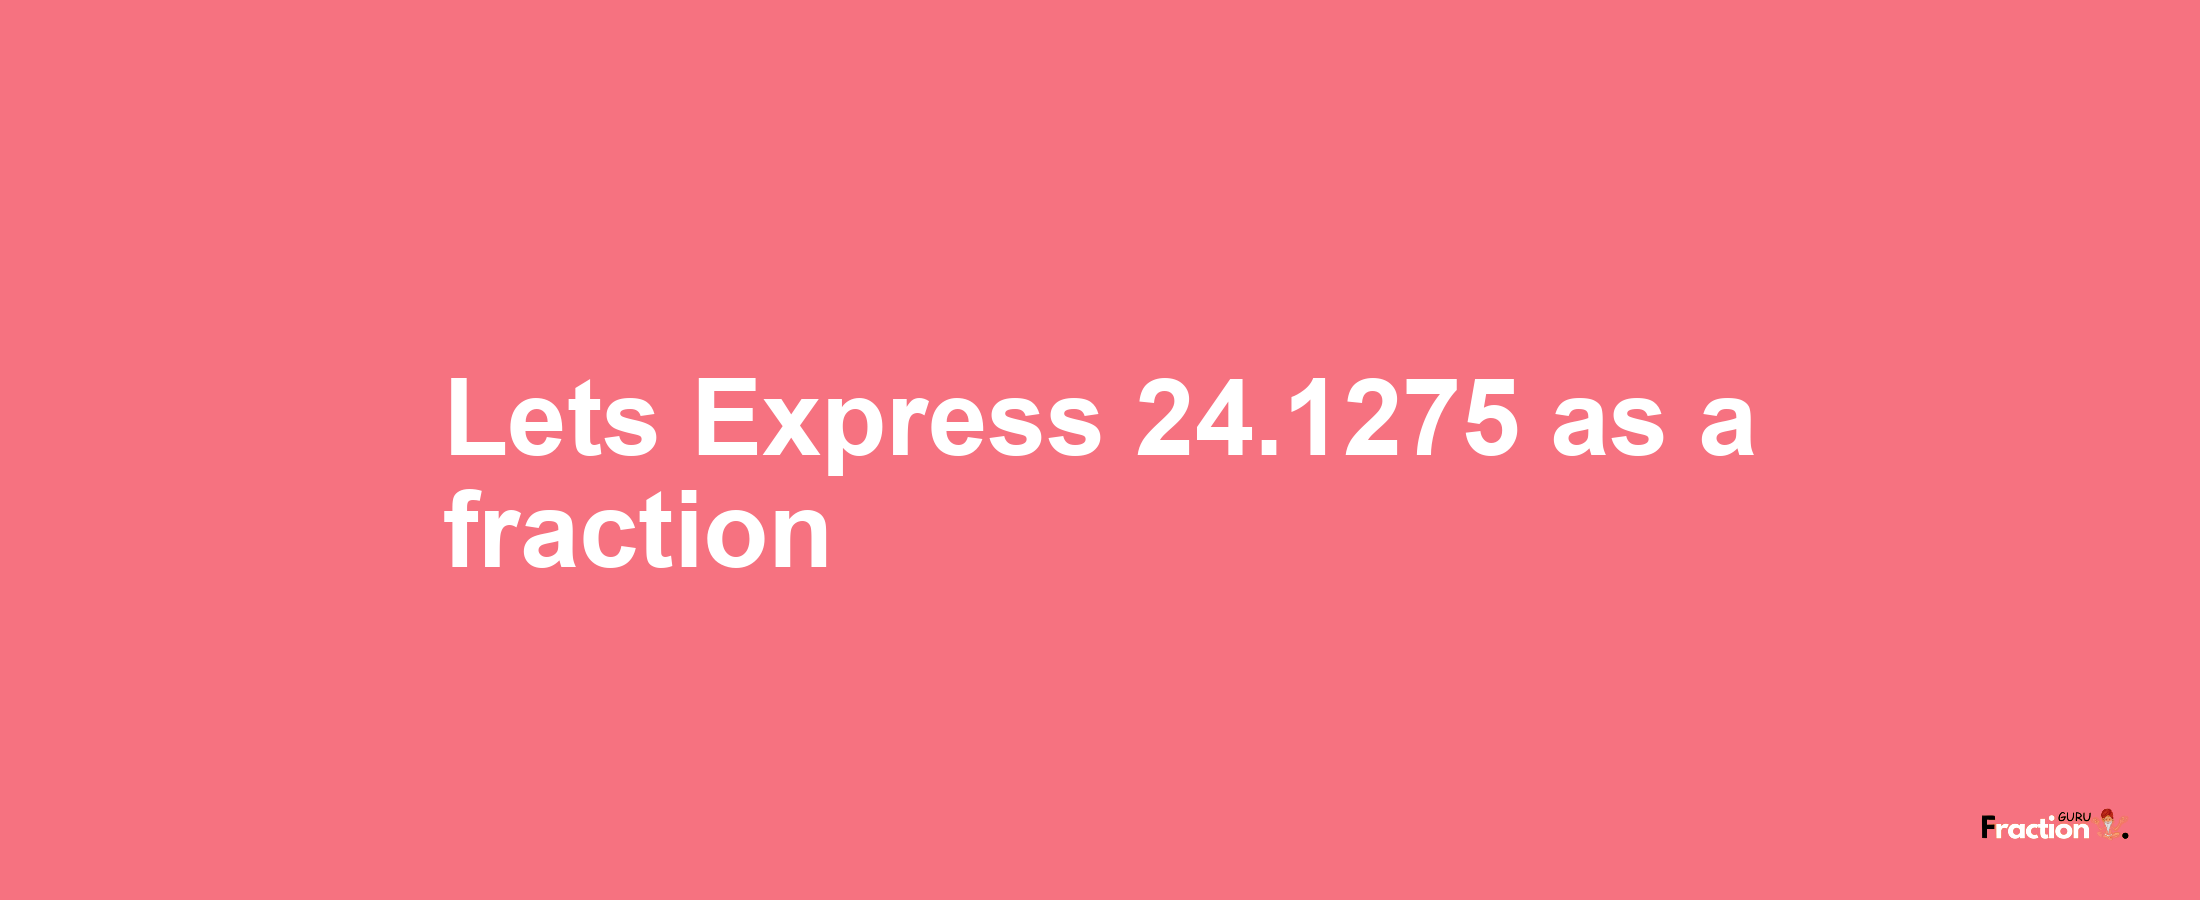 Lets Express 24.1275 as afraction